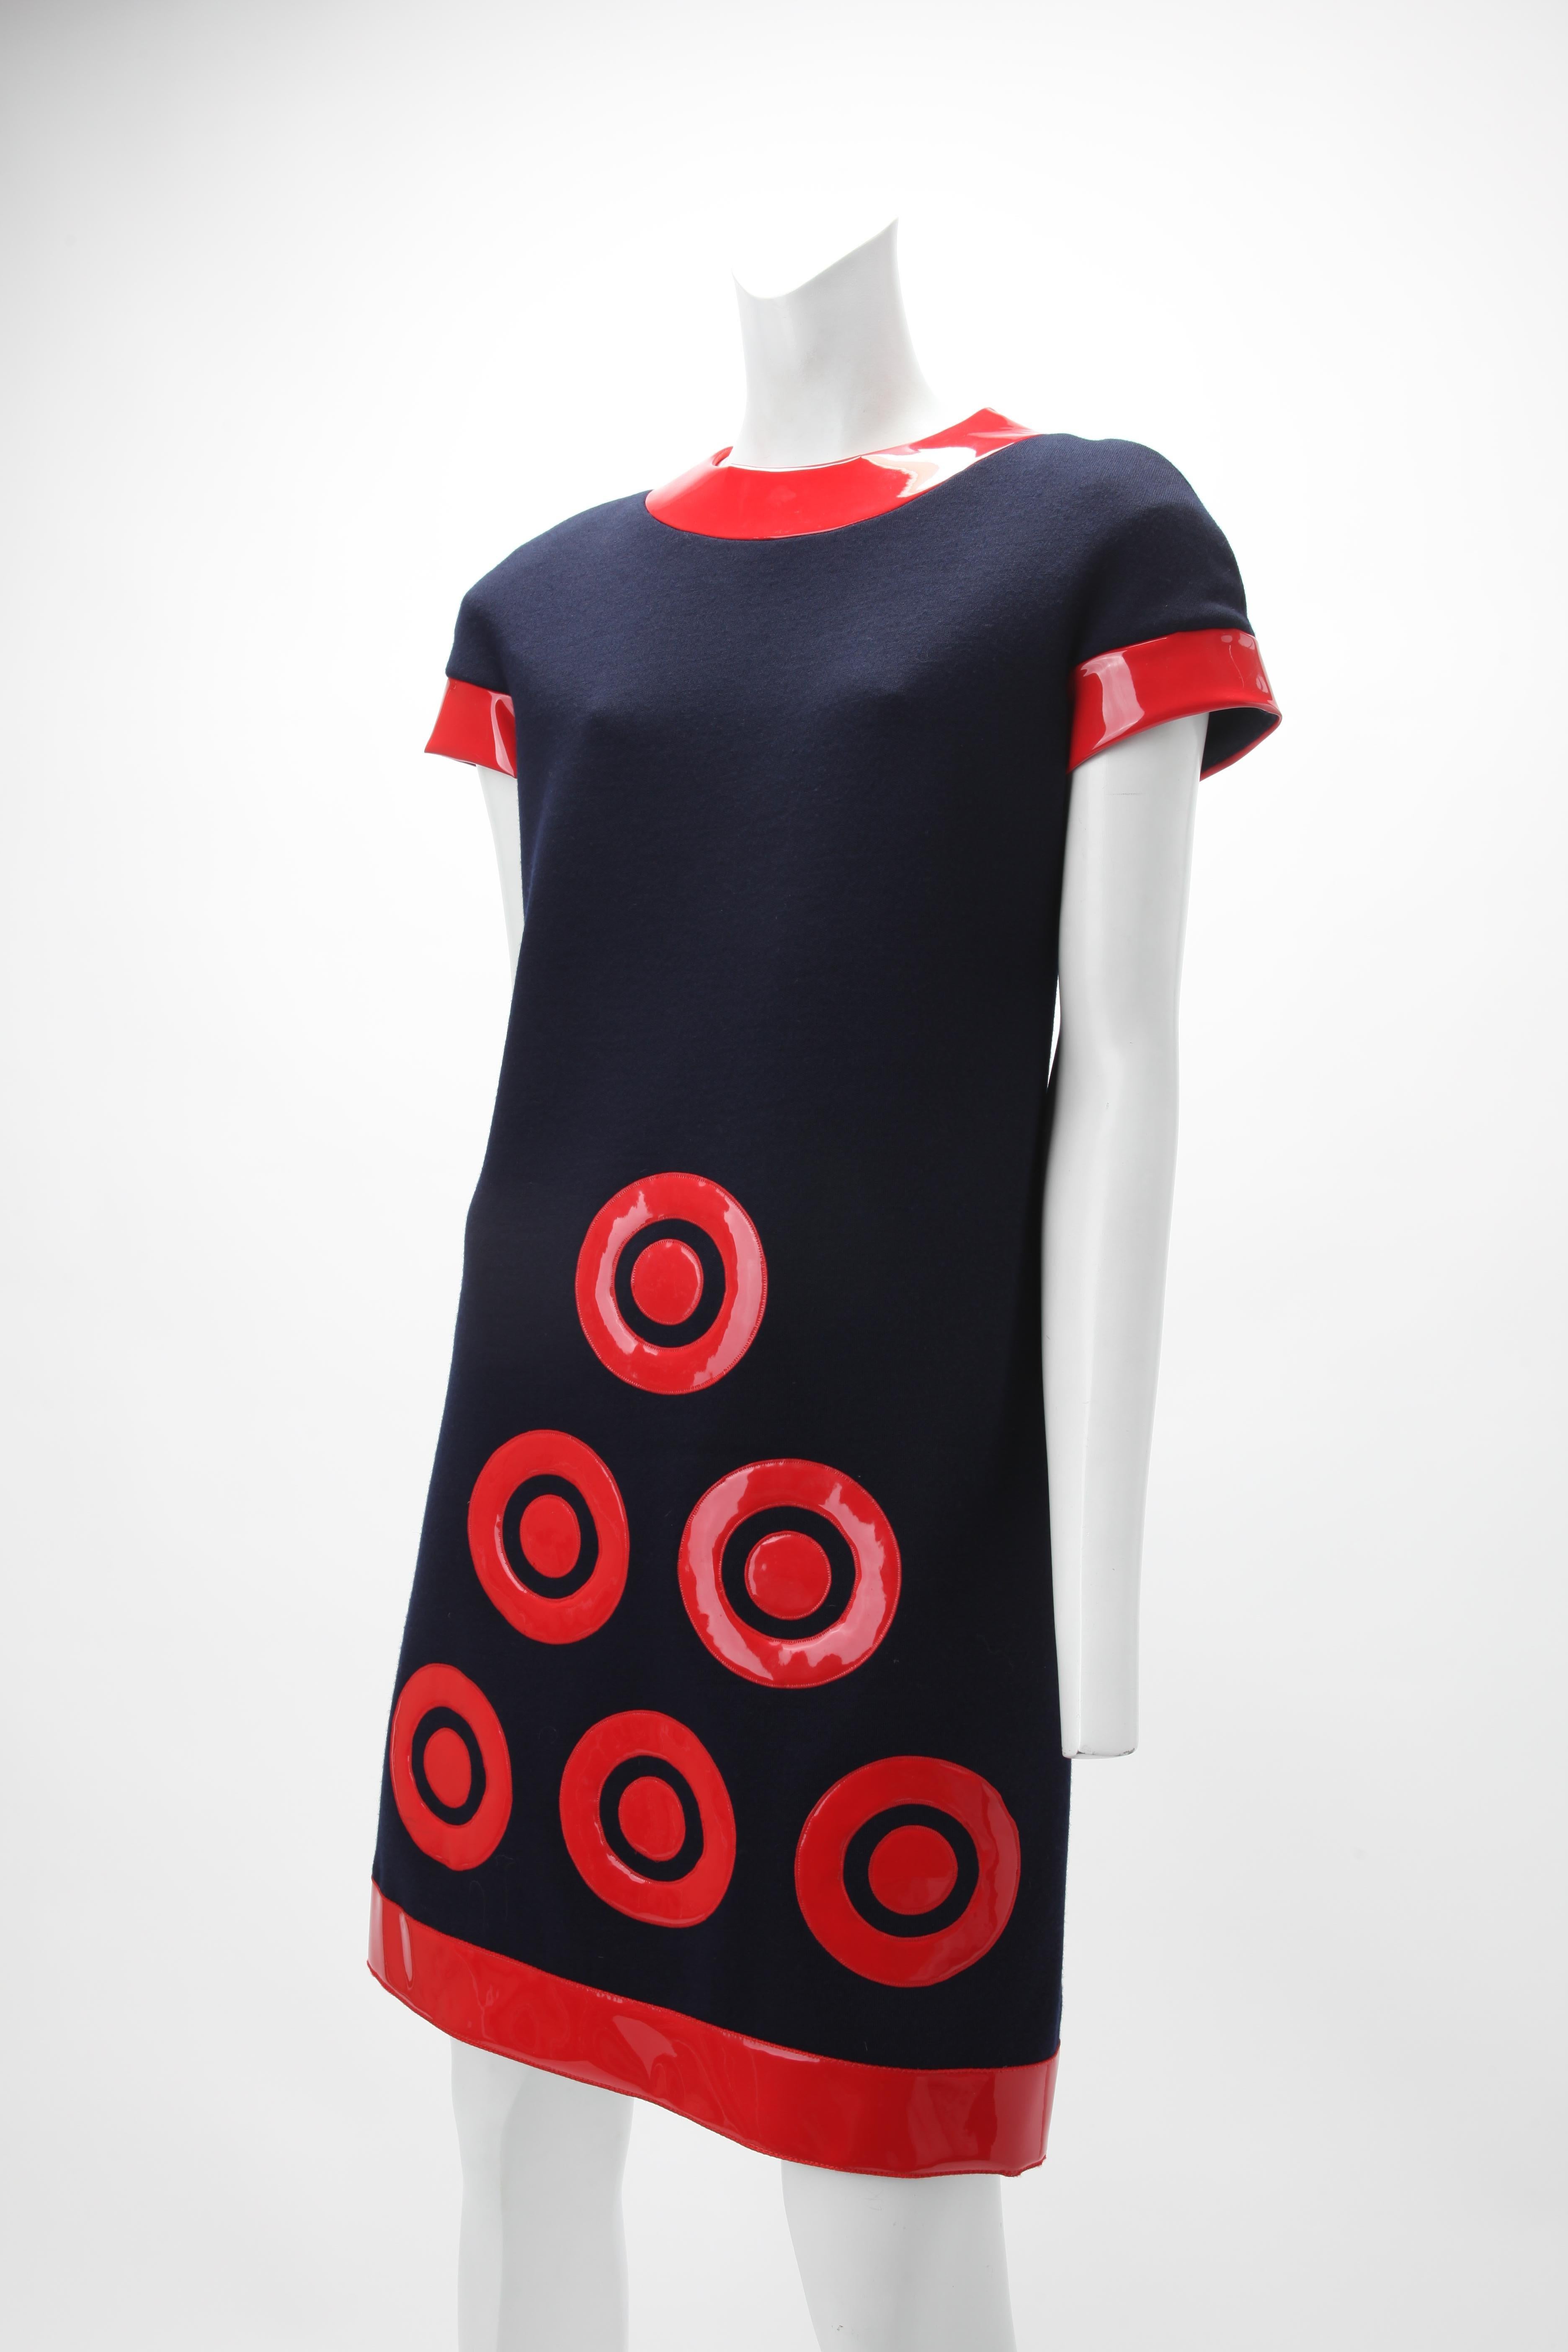 c. 1967 Pierre Cardin Futuristic Dress
Mini dress of navy wool jersey knit. The tubular mini dress has a rounded neckline and short sleeves. Red, shiny vinyl trim at neckline, sleeve hem, lower hem, and in the form of six Pierre Cardin bullseye